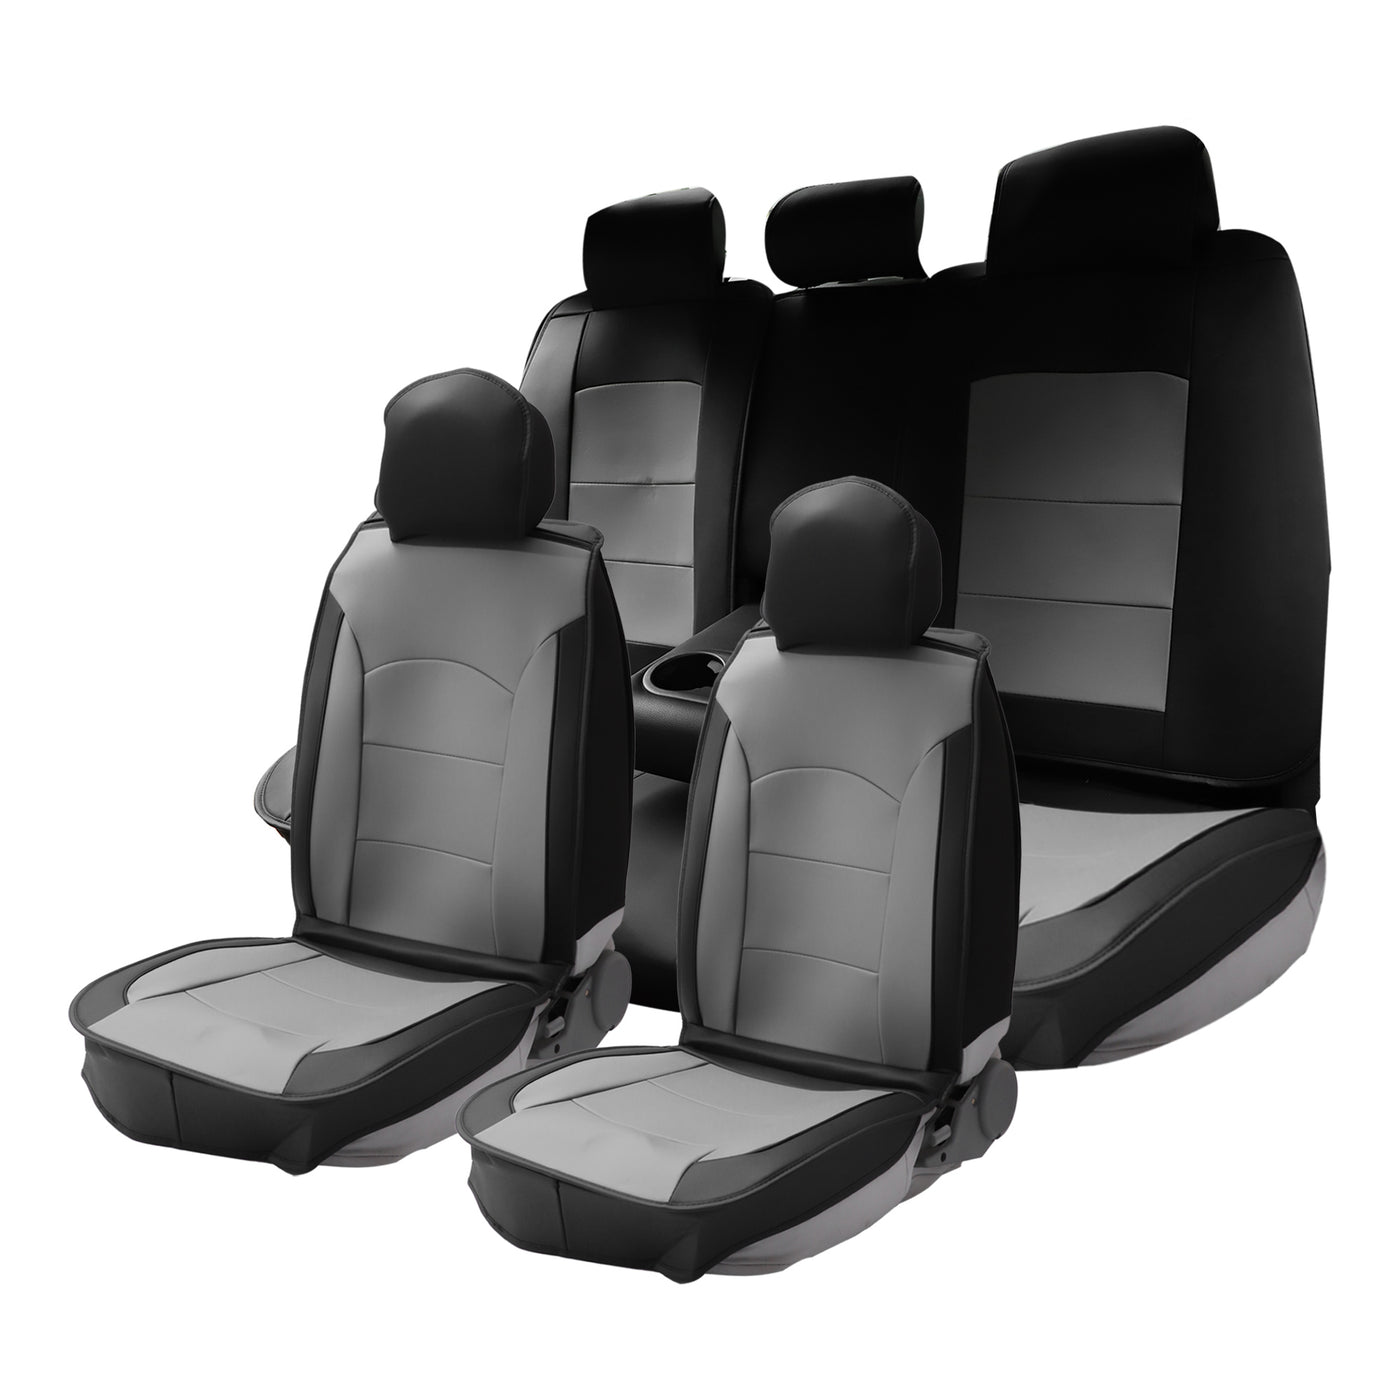 ACROPIX 5 Seat Full Set Universal Leather Car Seat Covers Pads Vehicle Seat Cushions Protectors Waterproof Non-Slip Black Gray - Pack of 11